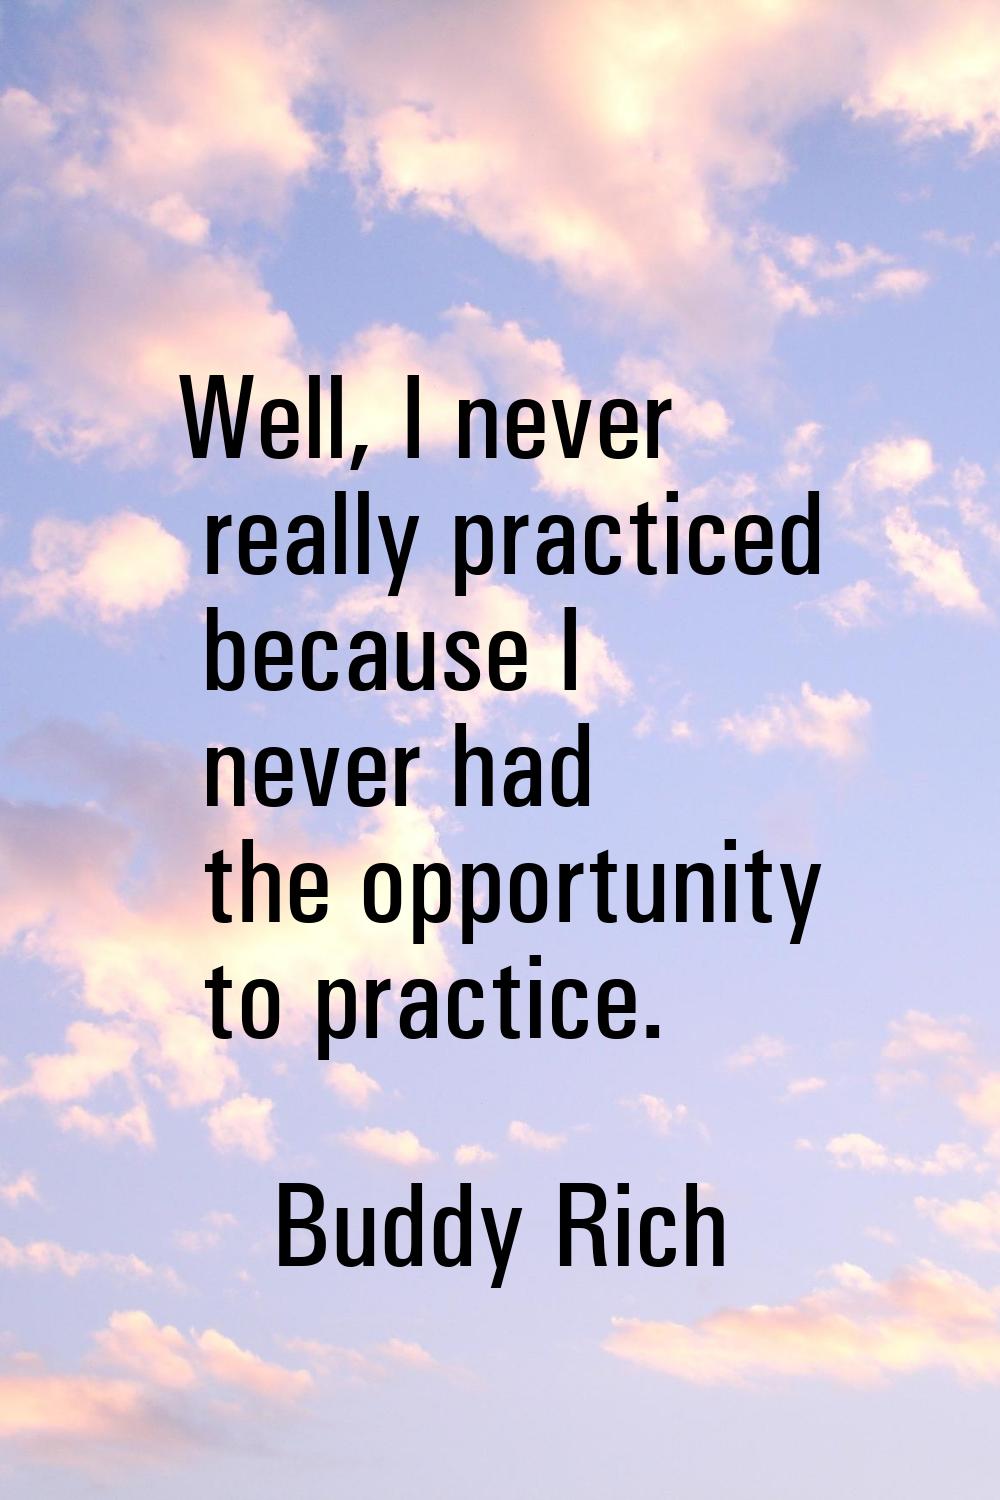 Well, I never really practiced because I never had the opportunity to practice.